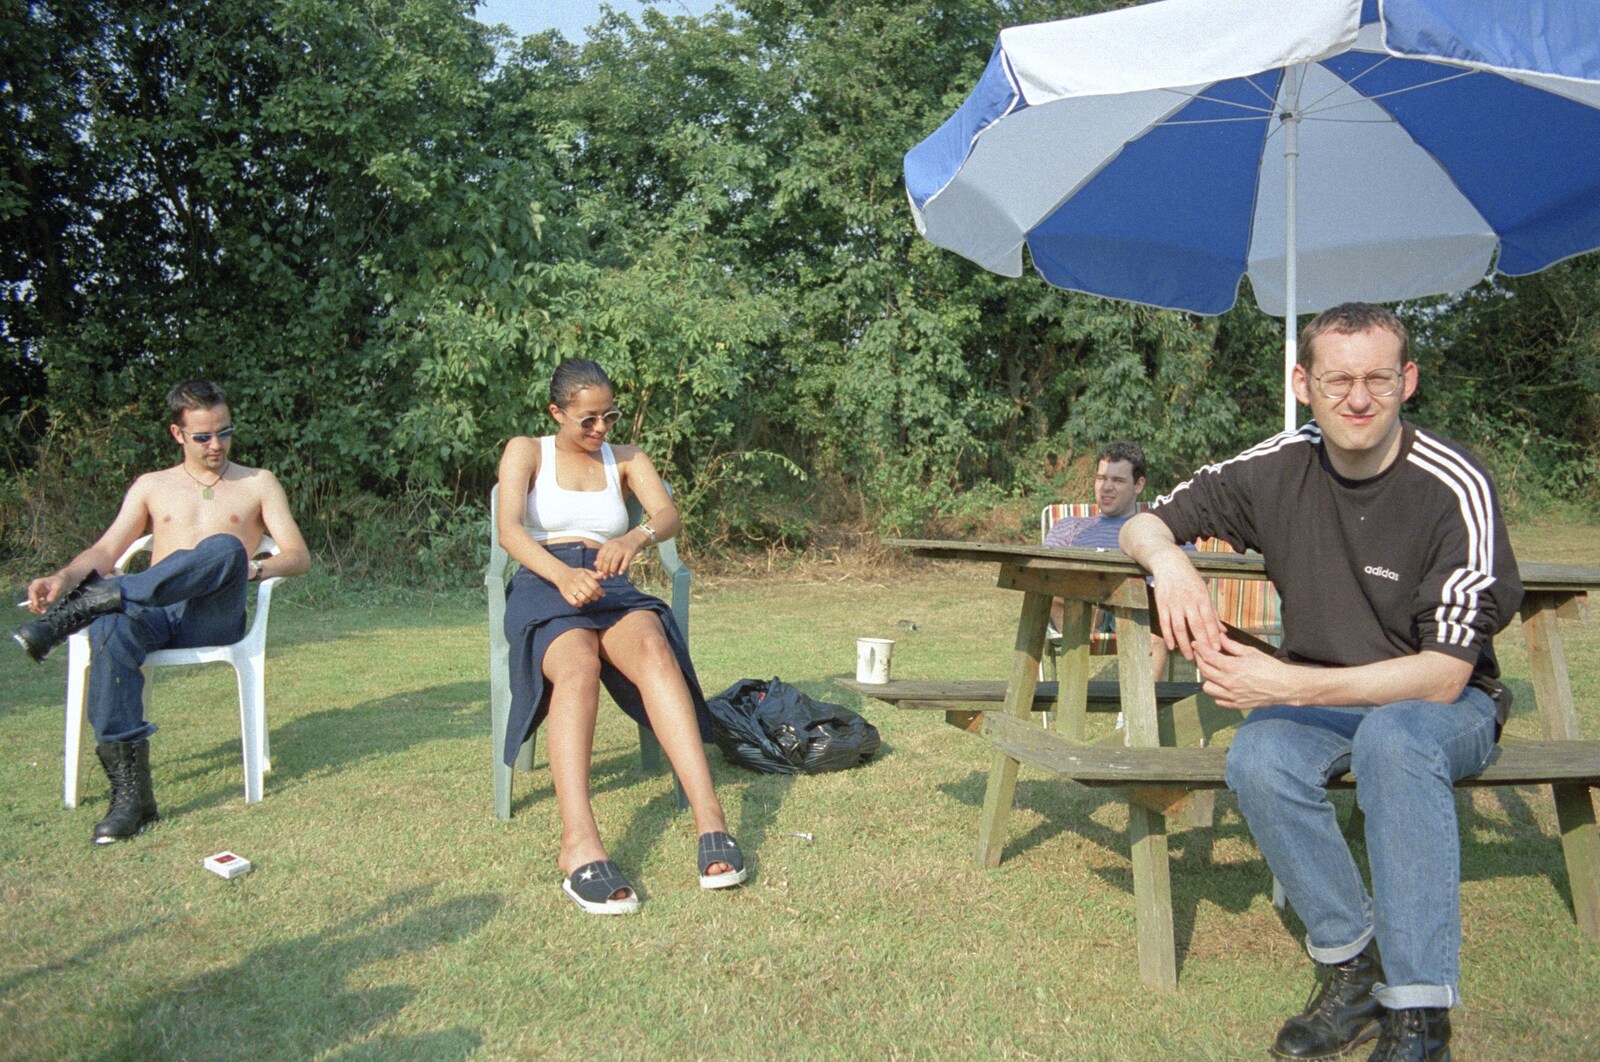 Trev, Natalie, Russell and Dougie relax from Bromestock 1 and a Mortlock Barbeque, Brome and Thrandeston, Suffolk - 24th June 1997